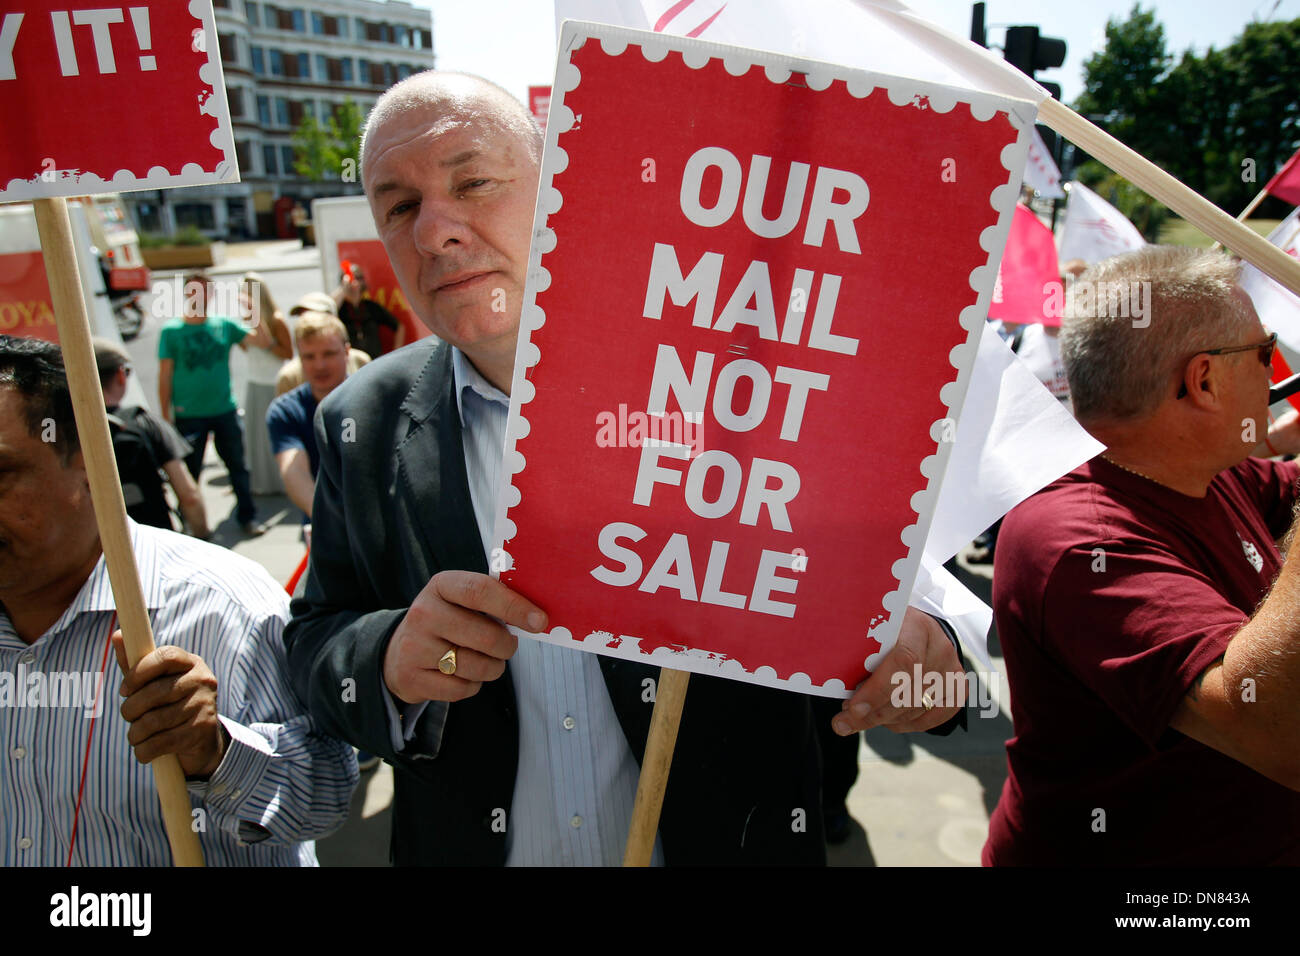 Postal workers and campaigners from the Communication Workers Union protest outside the Royal Mail headquarters Stock Photo